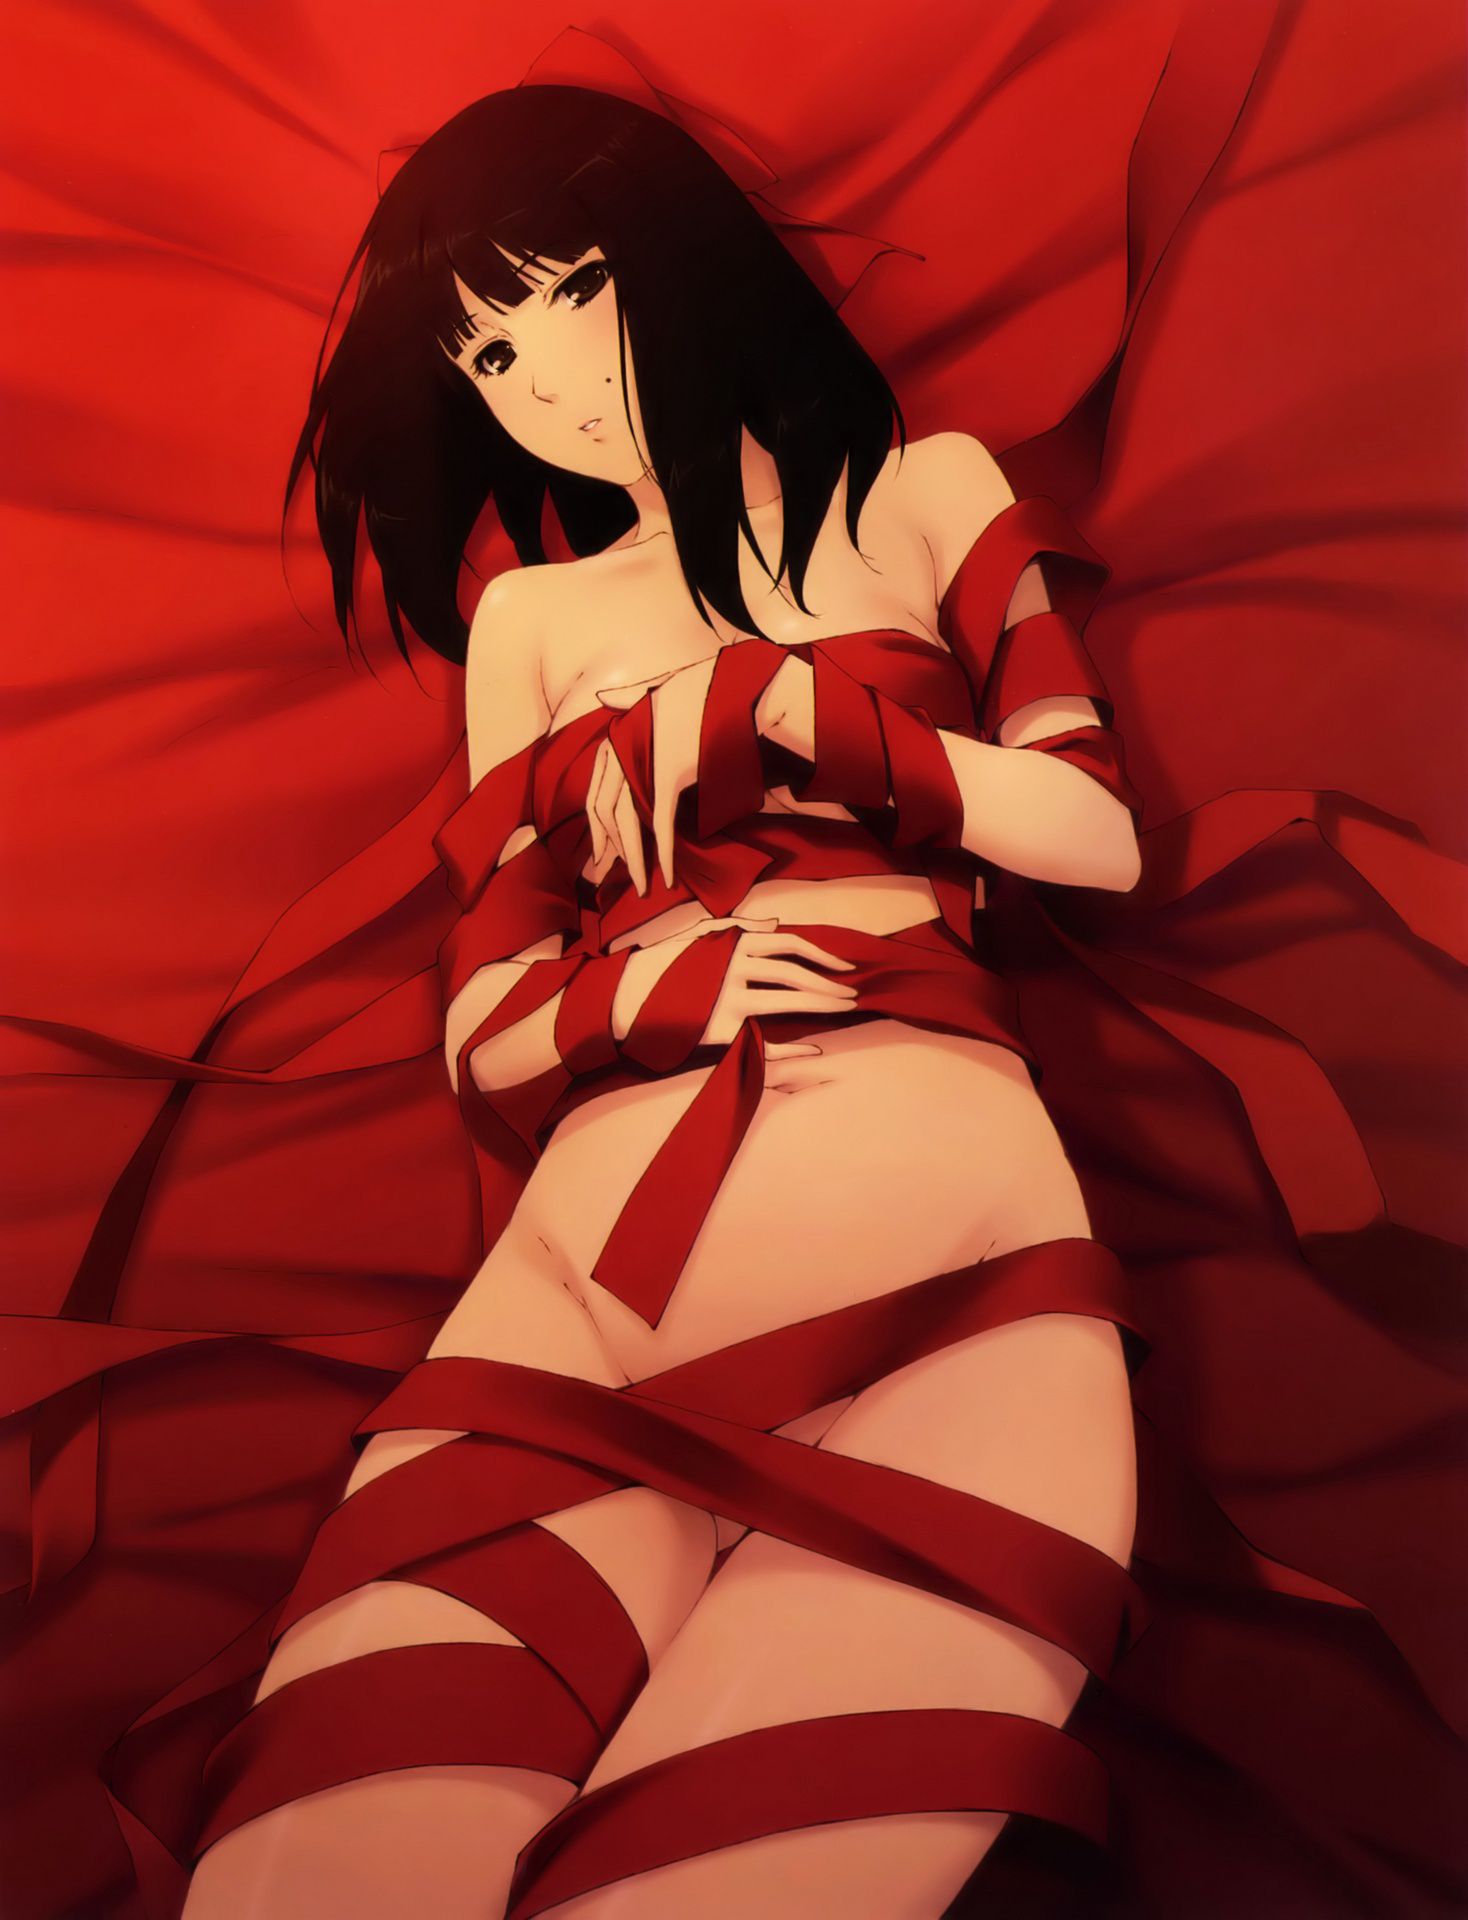 [39 pieces] A Christmas present is a nude ribbon eroticism image of the girls wrapped for って feeling me! 37